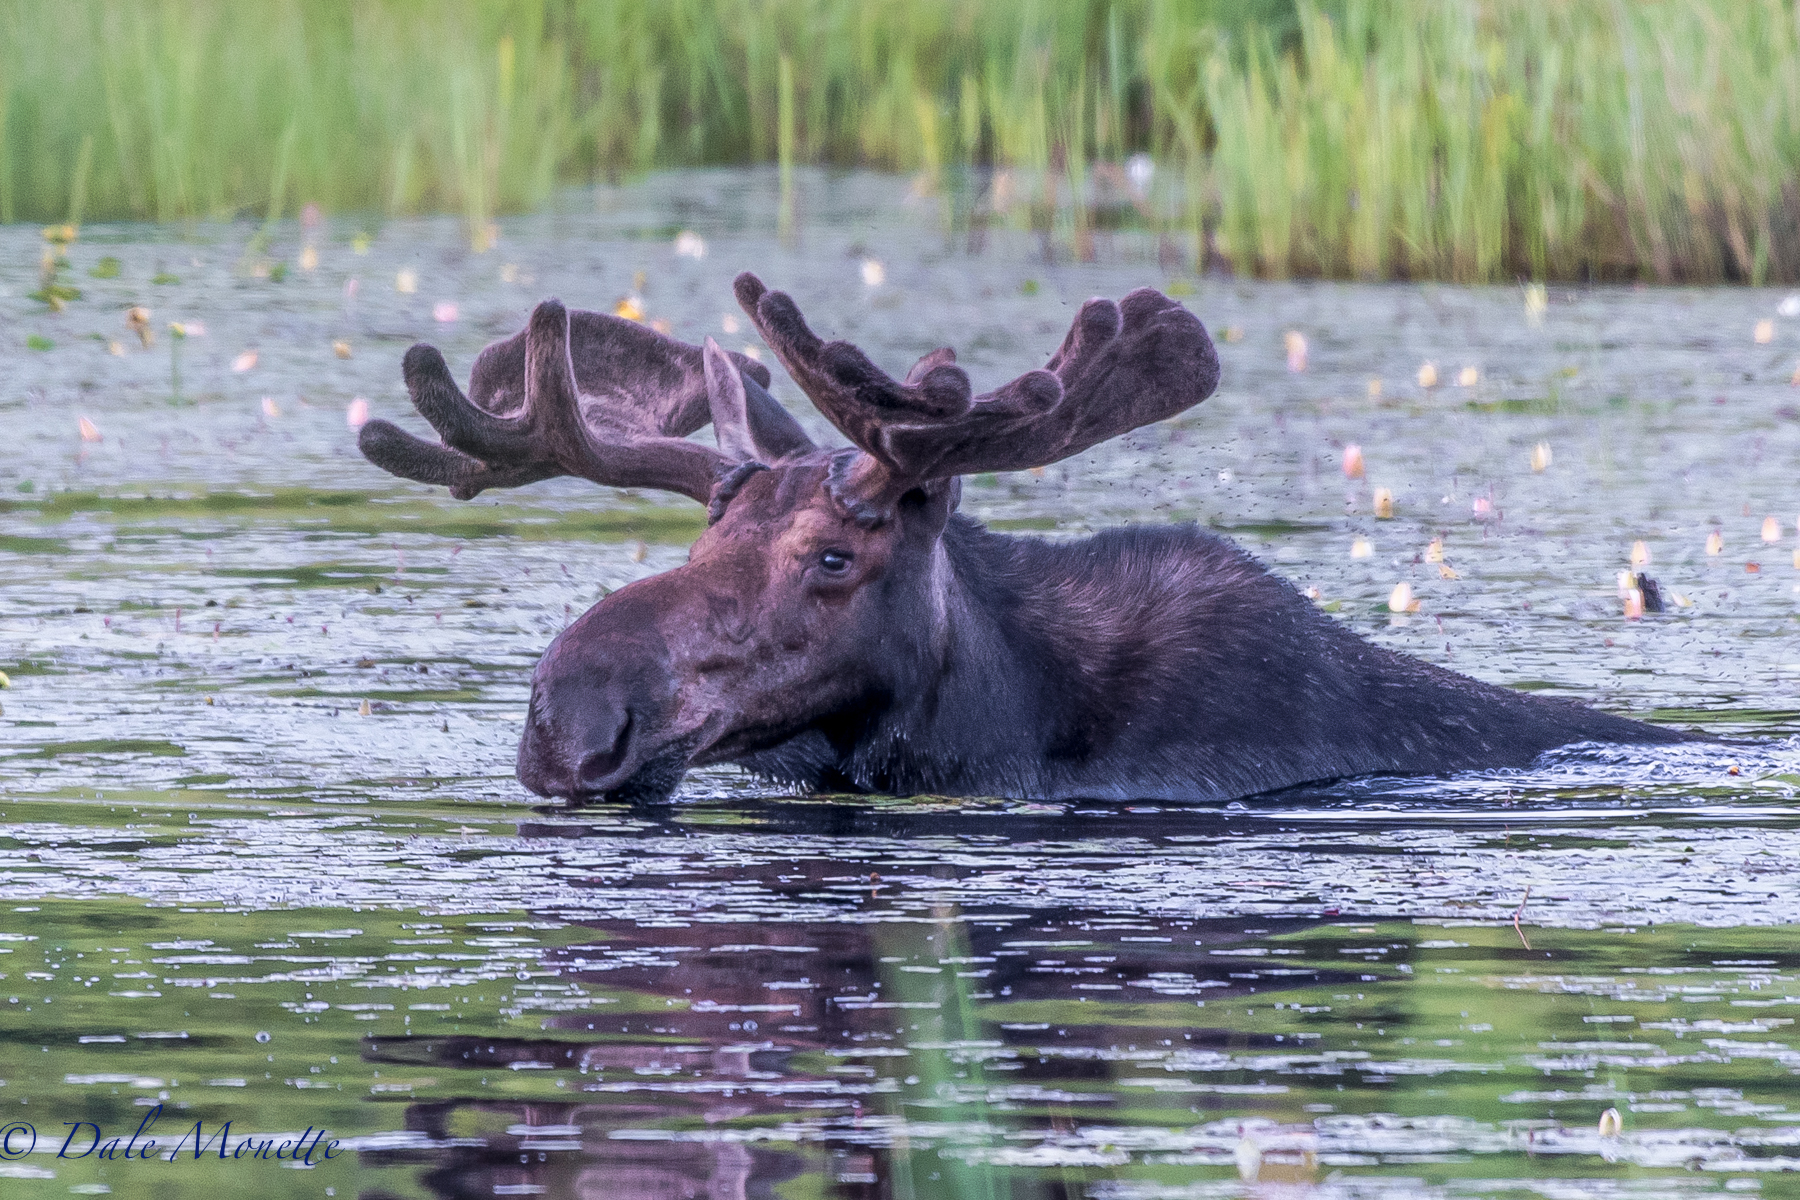   Heres the same moose as the last photo. &nbsp;Notice the deer flies trailing behind his head. &nbsp;Thats why moose love to get into ponds up to their necks sometimes. &nbsp;To cool off and as a relief from biting insects. &nbsp;7/4/16  